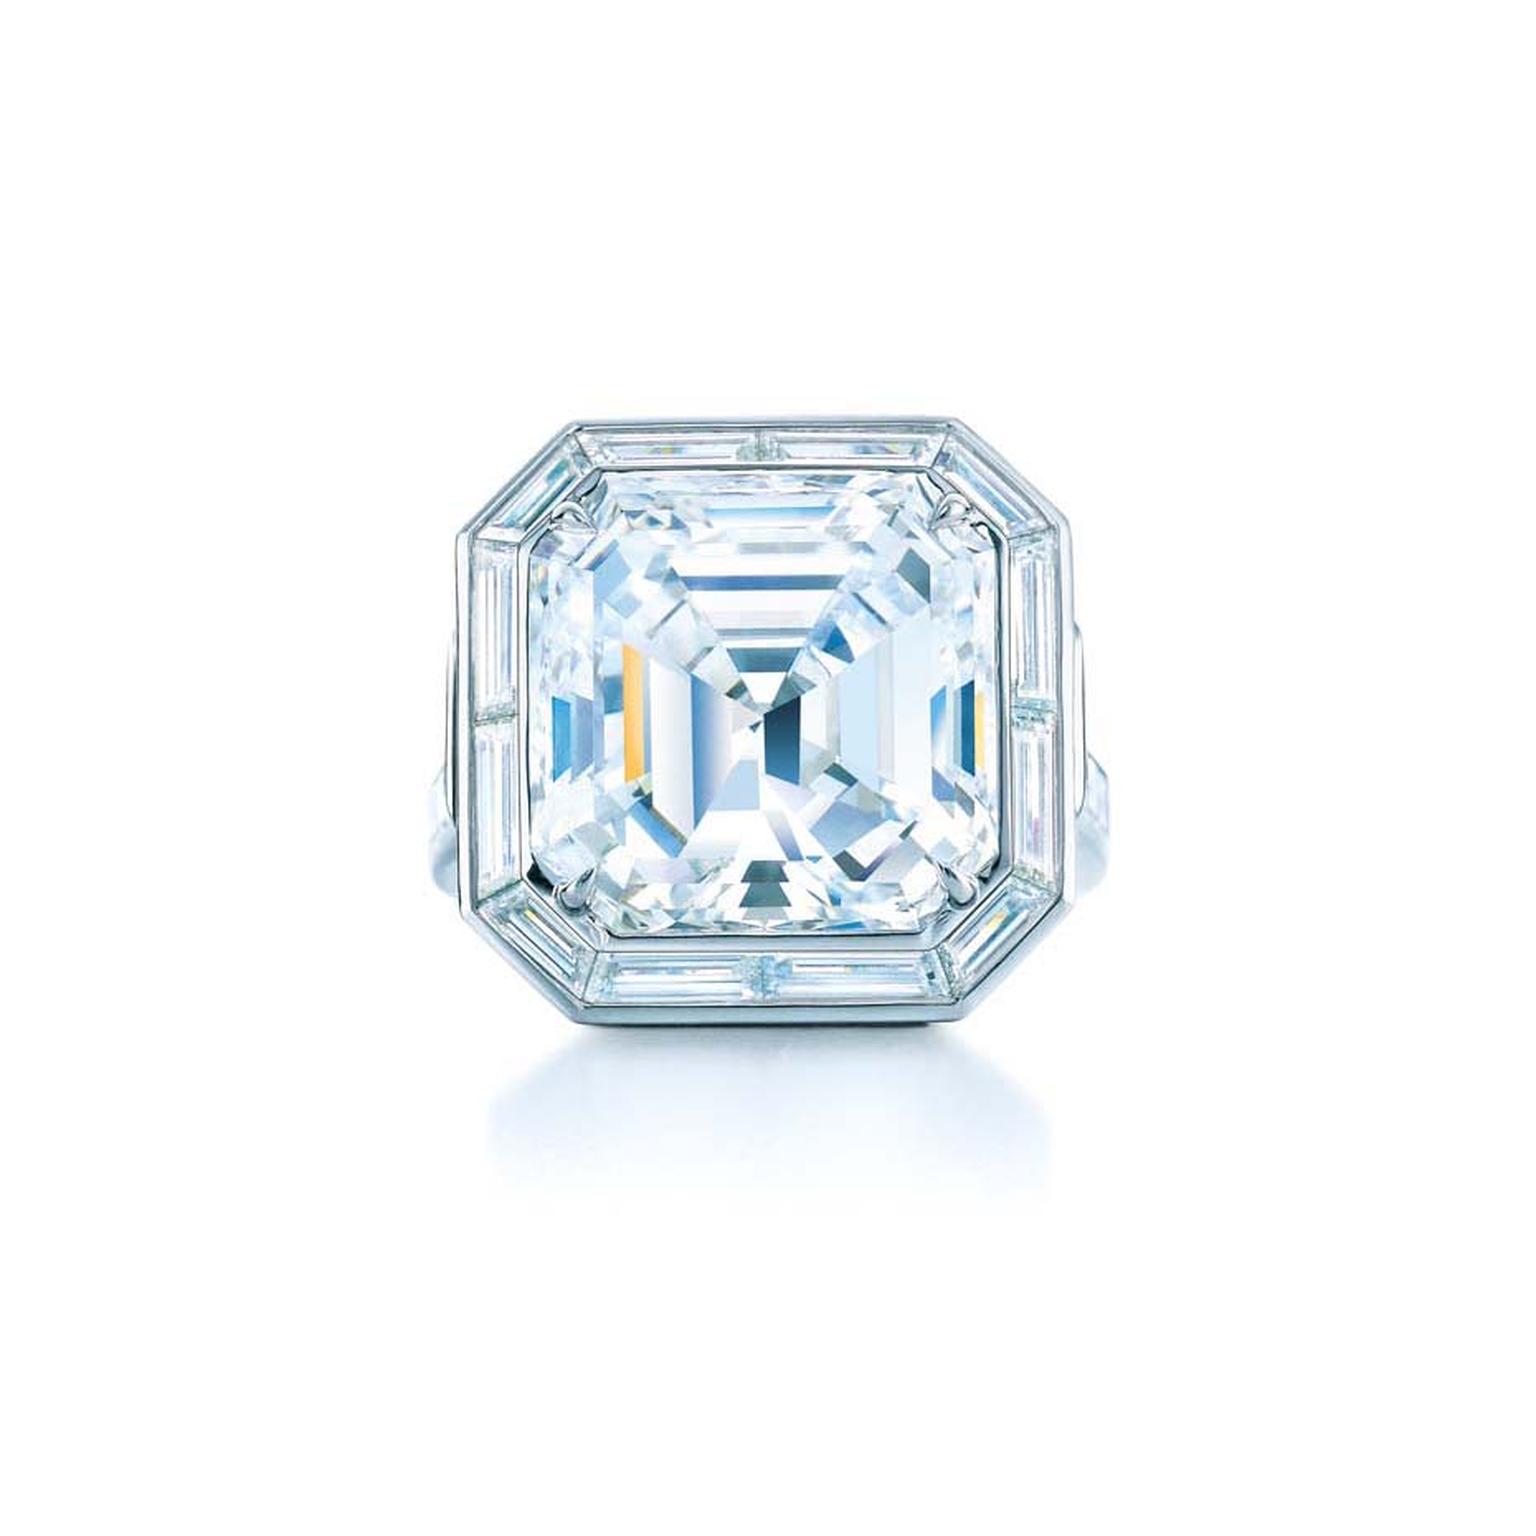 Tiffany & Co. emerald-cut diamond engagement ring from the 2014 Blue Book collection.